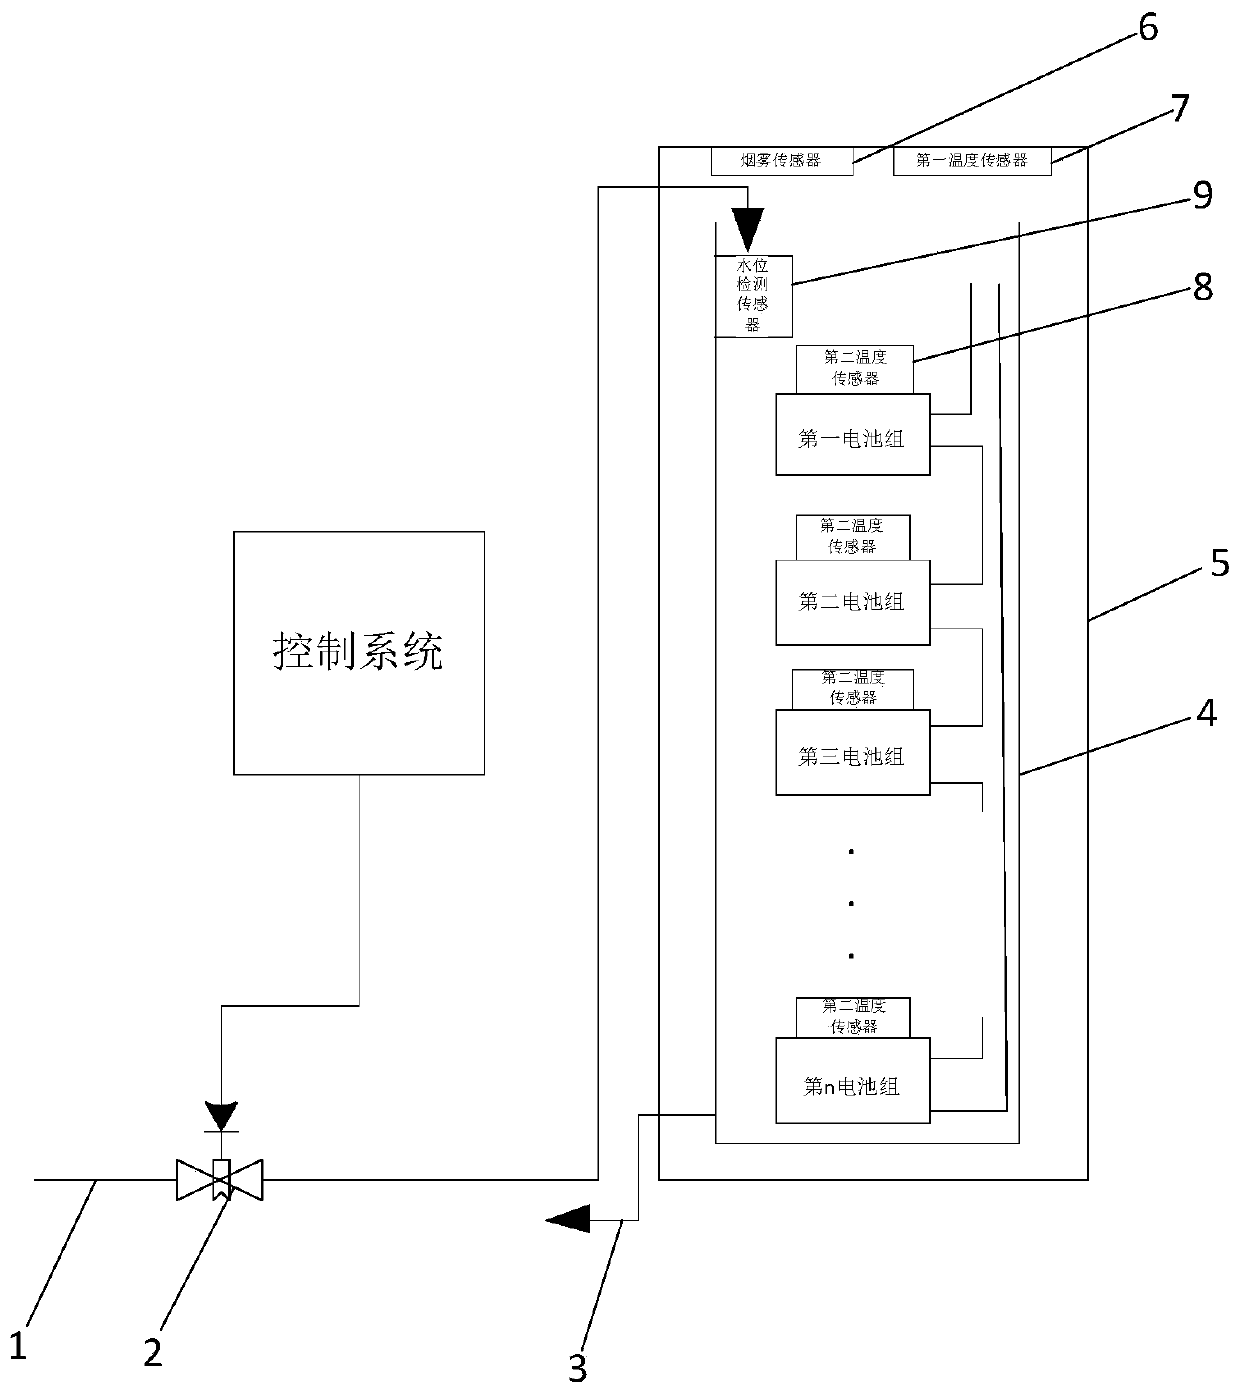 Lithium battery energy storage system cabinet automatic fire extinguishment device and system